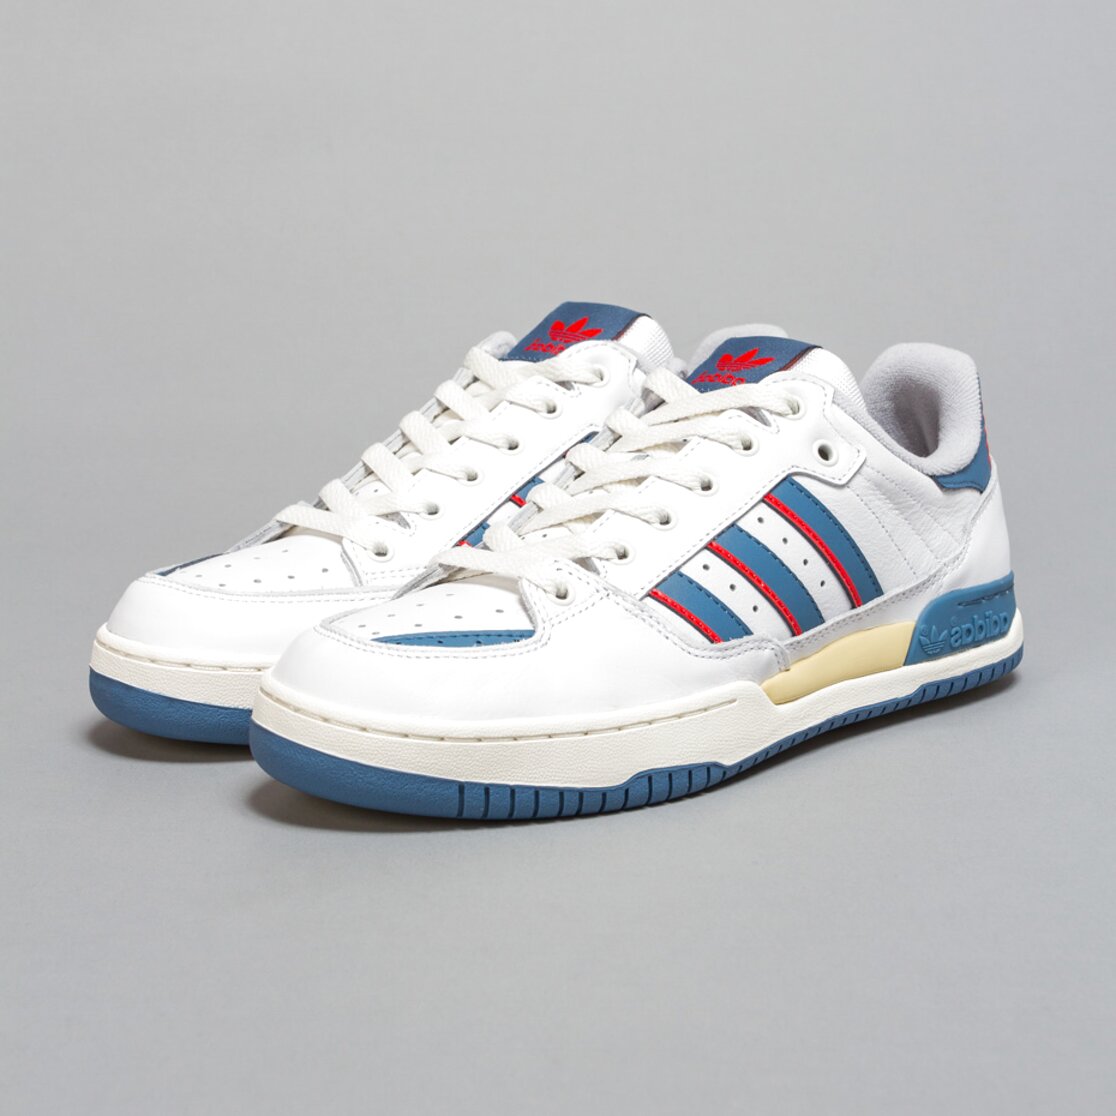 adidas ivan lendl trainers for sale